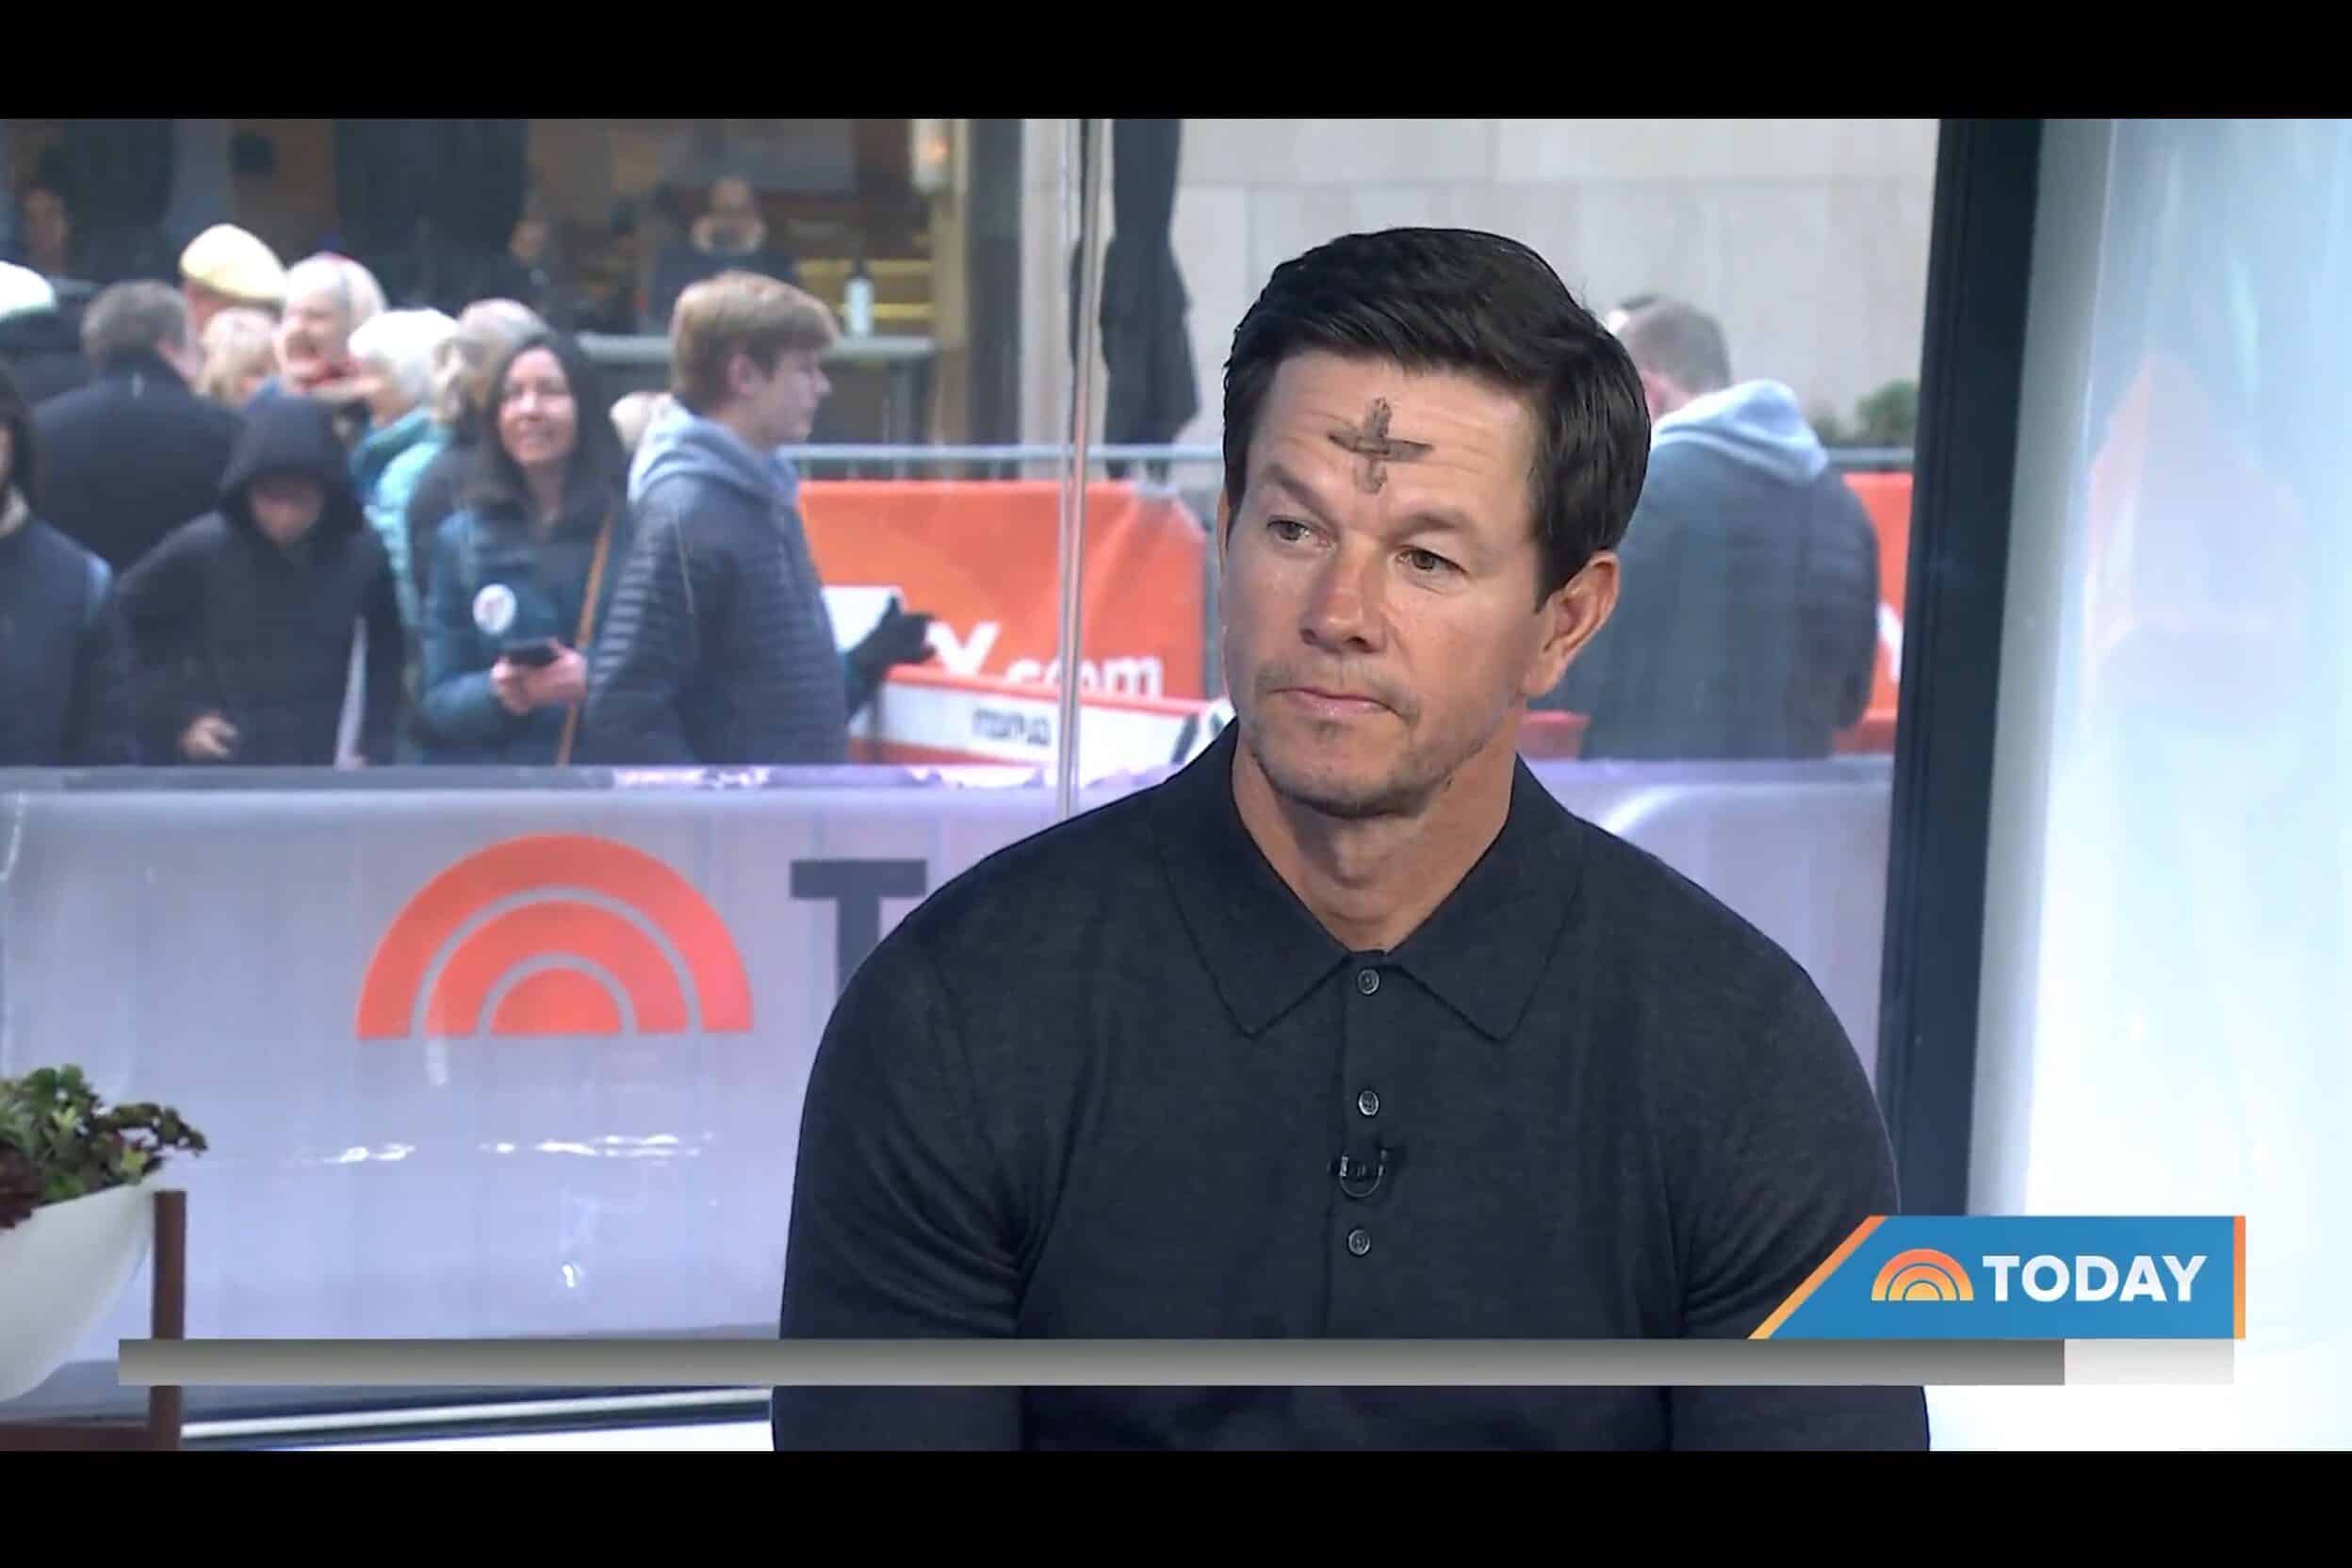 Hollywood Star Mark Wahlberg Says Faith “Not Popular” In His Industry – But God “Came To Save The Sinners” (VIDEO)